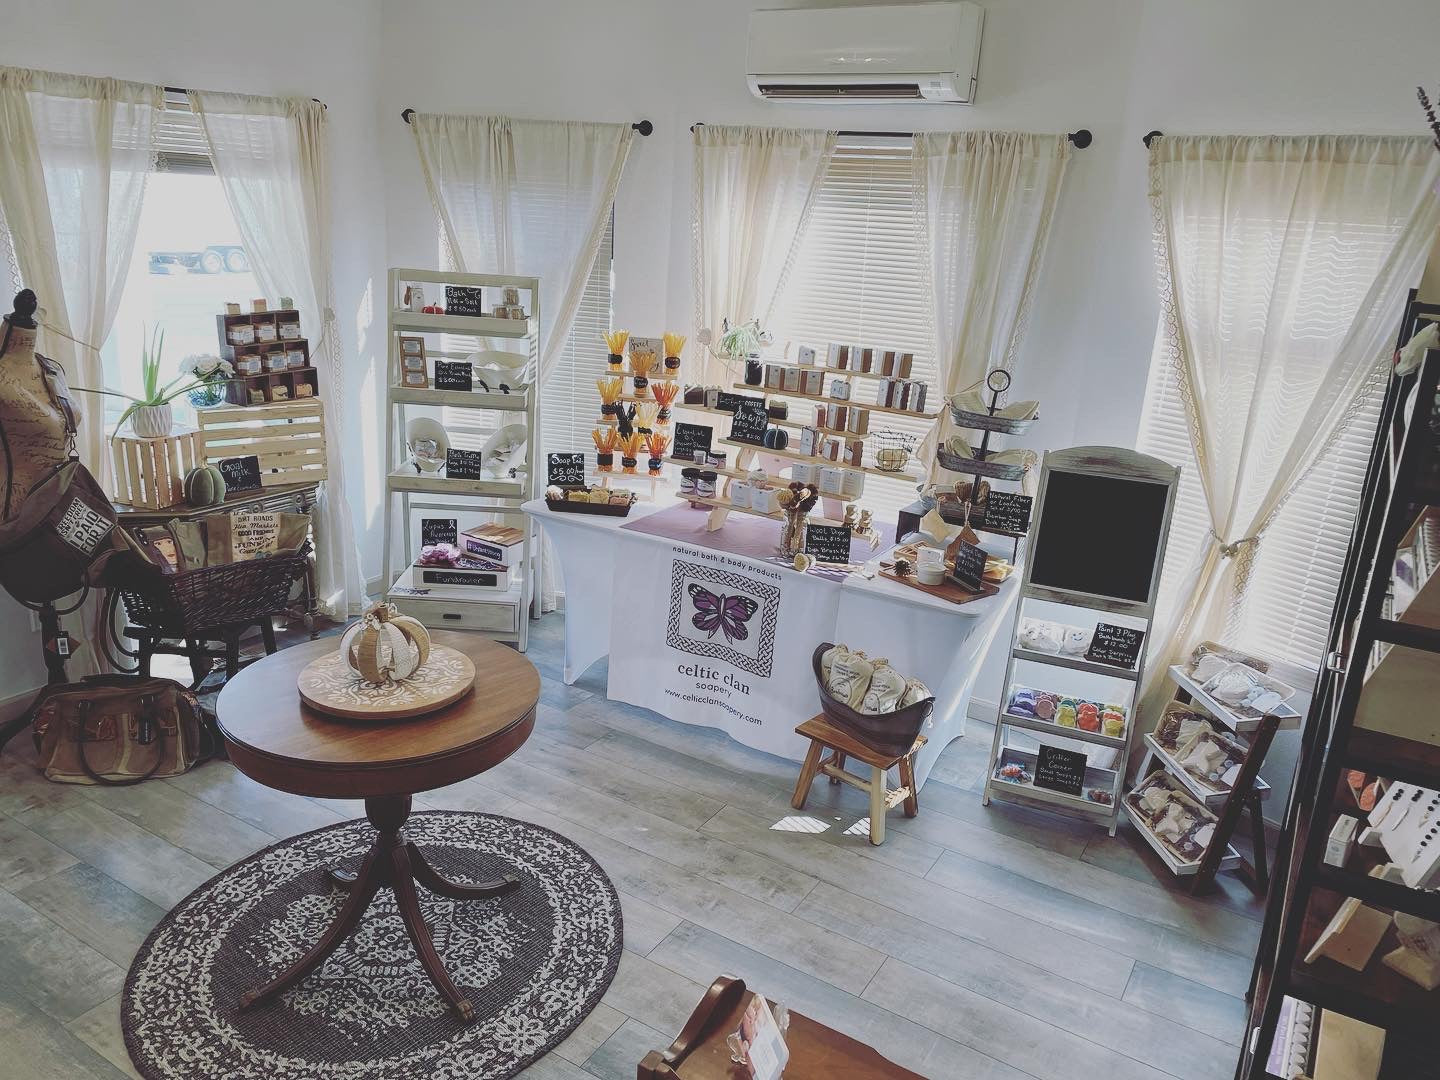 The Celtic Clan Cottage retail space with products by Celtic Clan Soapery